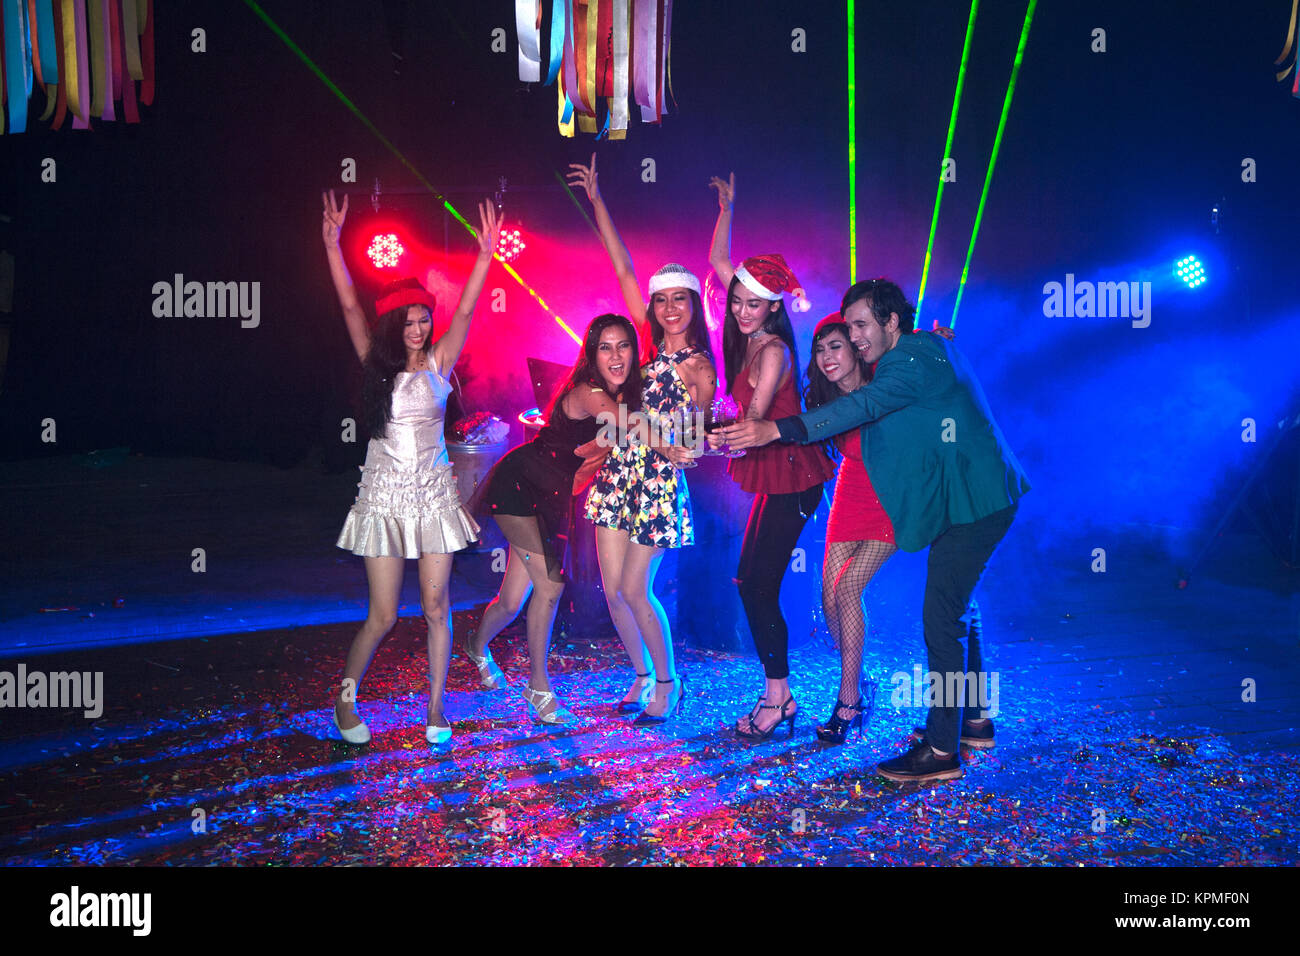 Group of people dancing at night club party and lights background Stock  Photo - Alamy